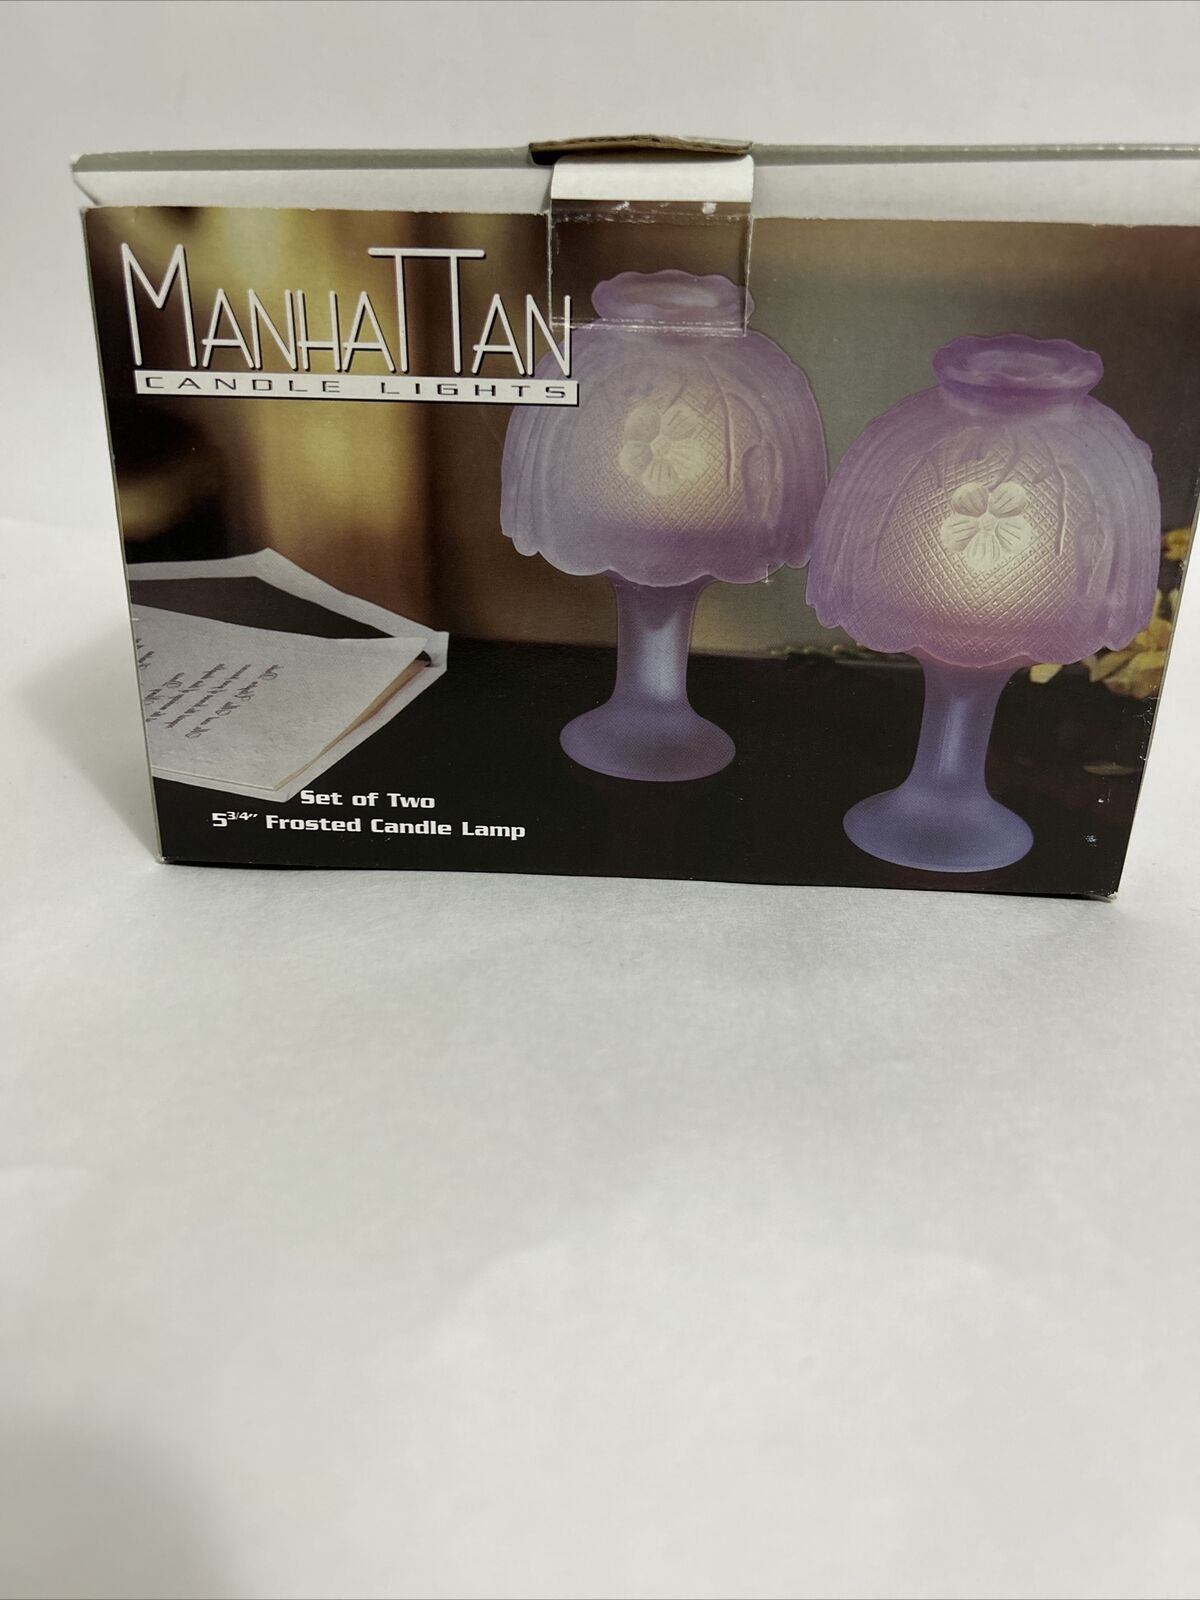 2 Manhattan Candle Lights By Crystal Clear, “ Parisian Lavender” New